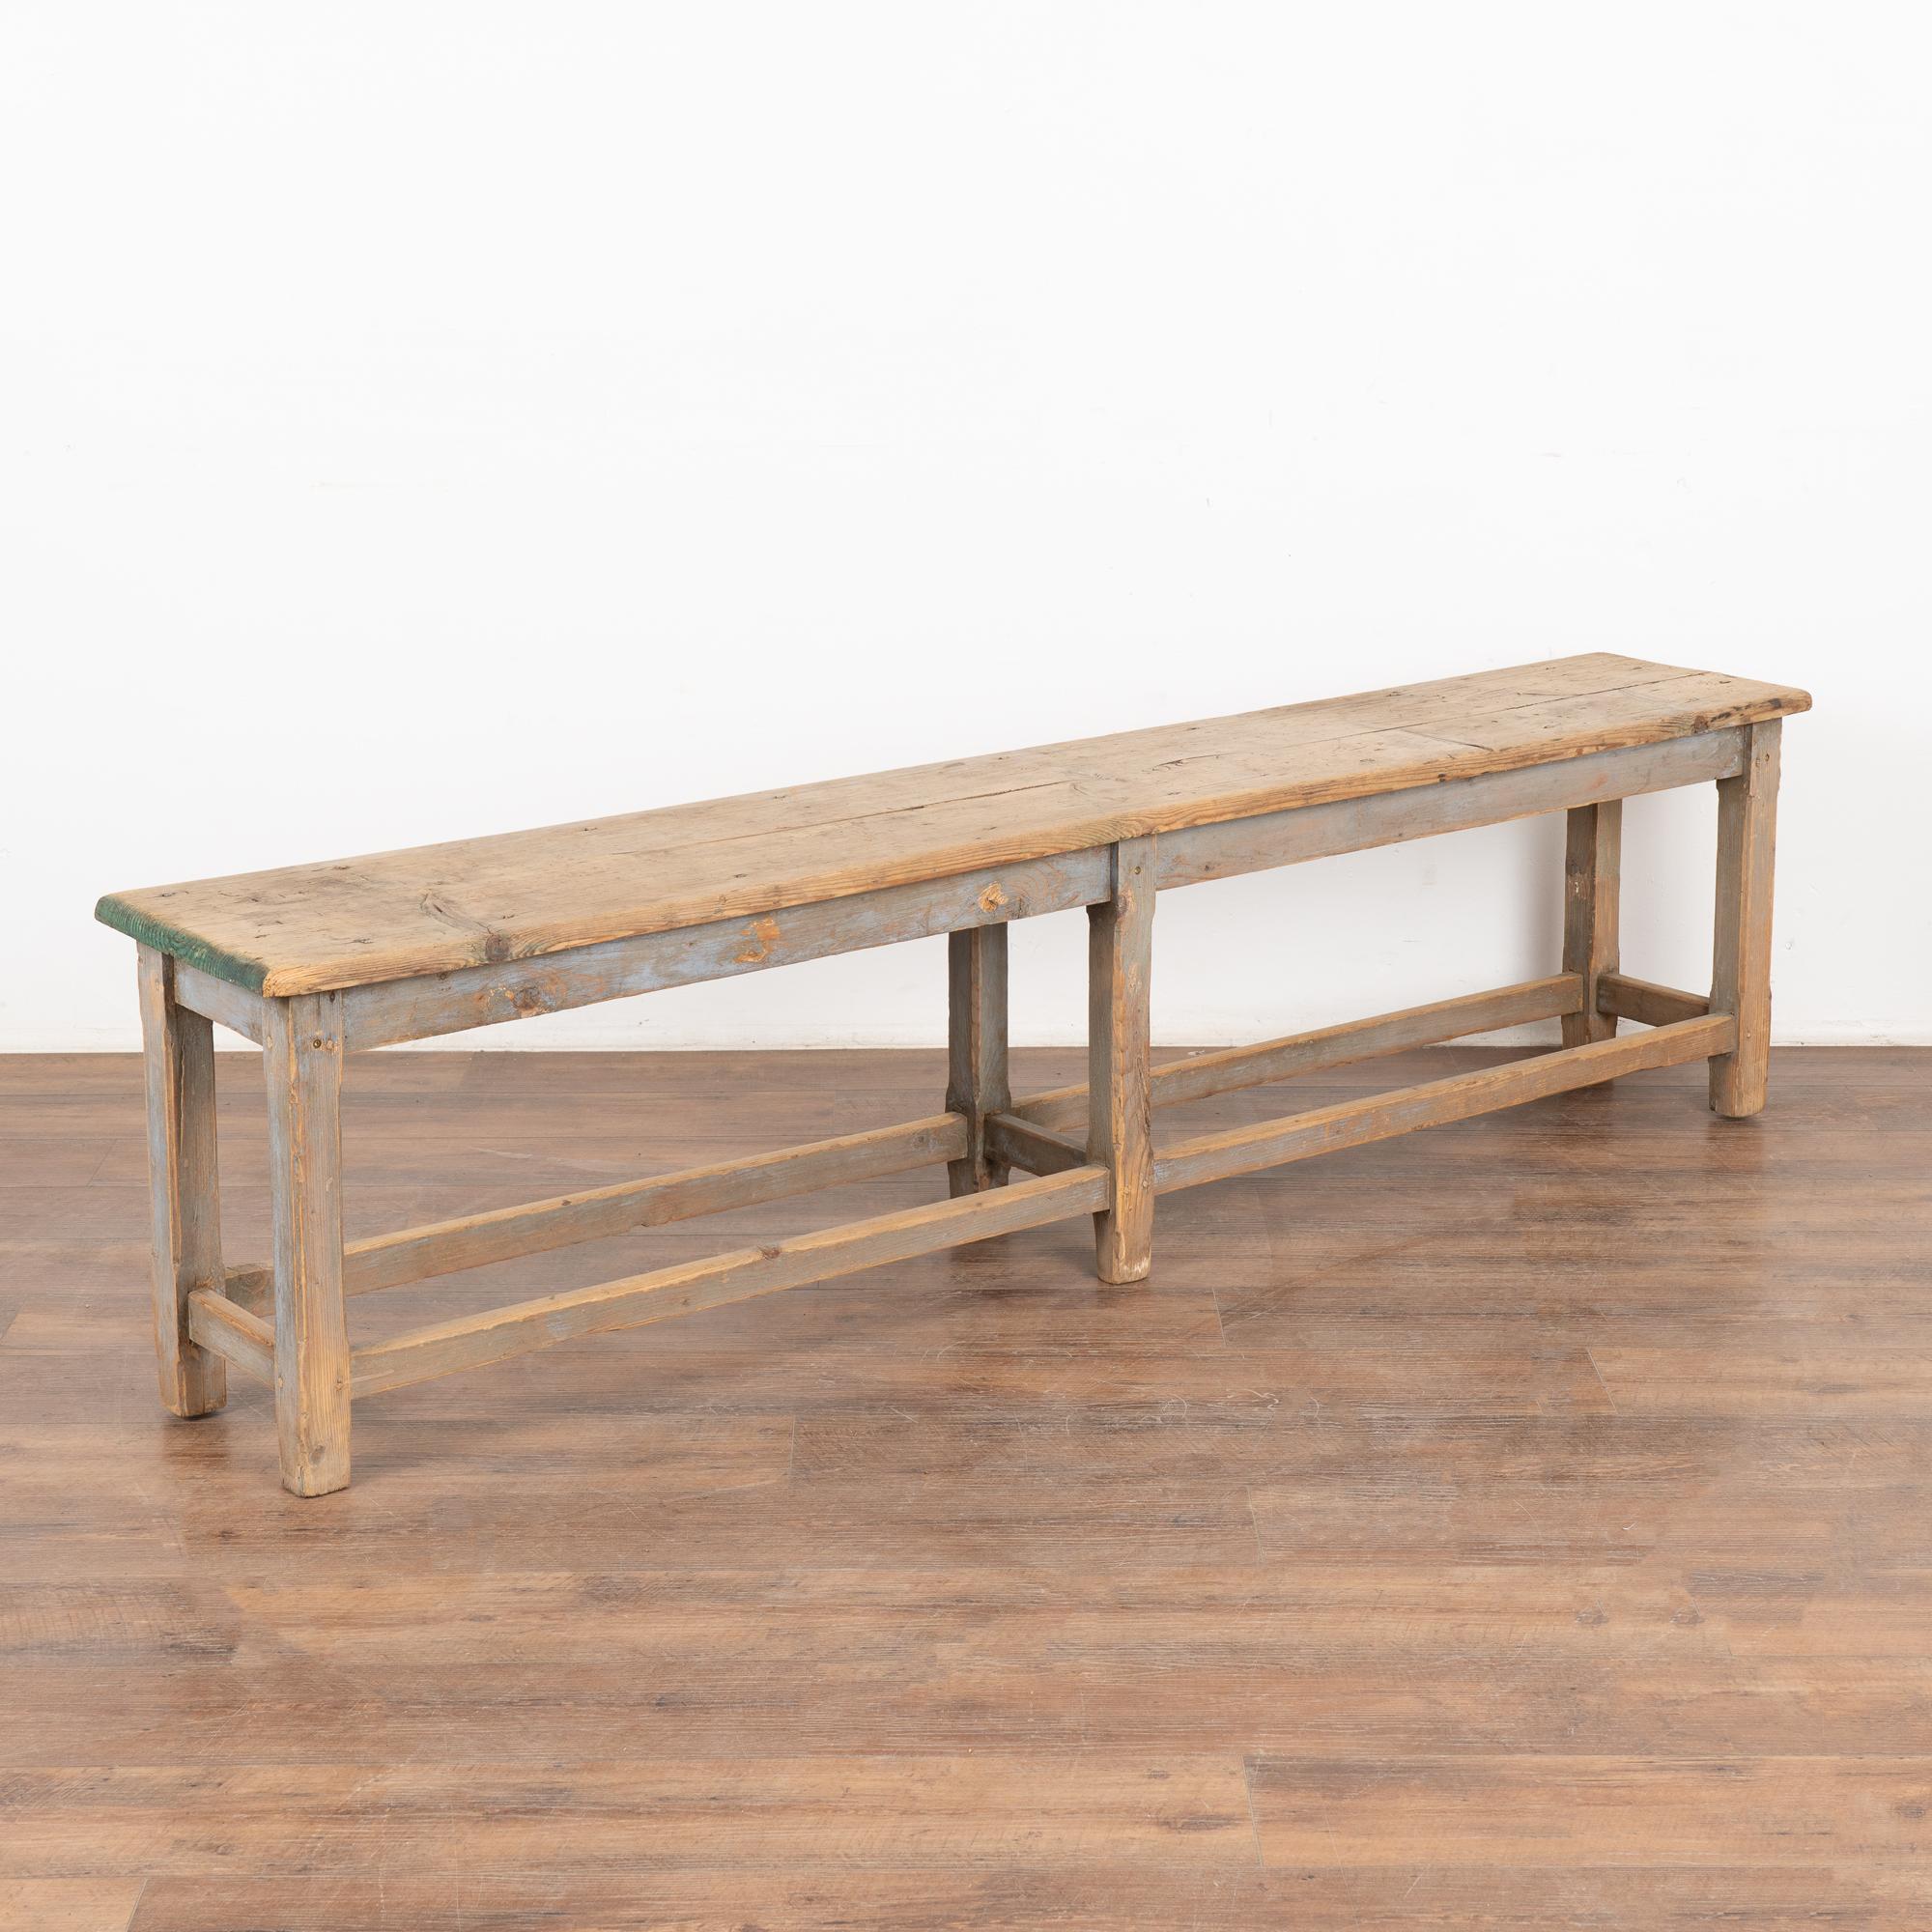 Rustic plank top bench with deep aged patina, see residual blue/gray paint and touches of green.
The top reveals generations of use with nicks, stains, cracks and scuffs which add character to the narrow bench.
Restored, this bench is strong, stable